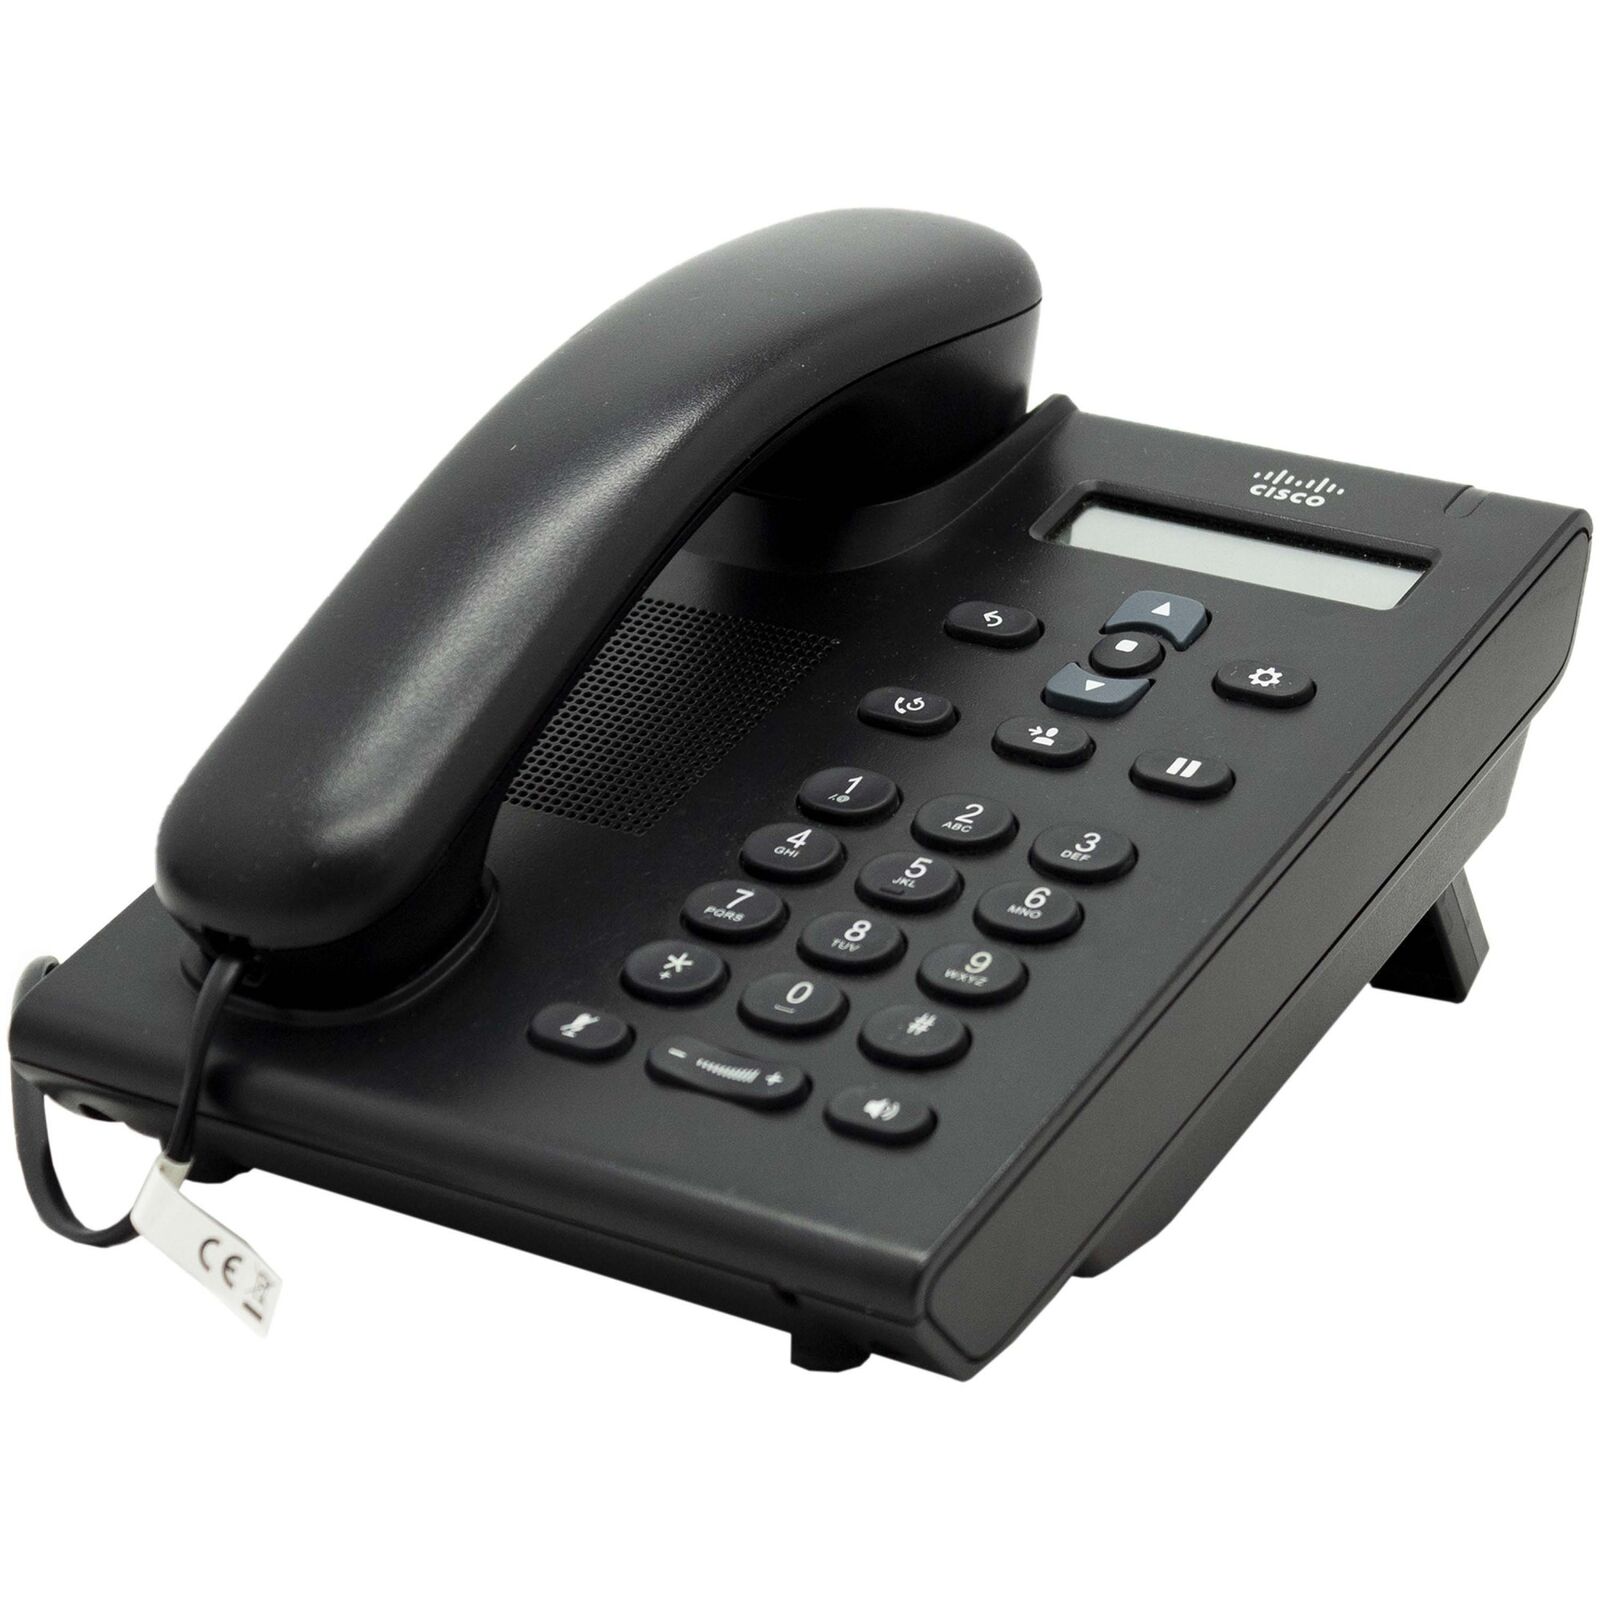 Cisco CP-3905 Unified SIP Phone 3905 - REMANUFACTURED Foto 7208852-1.jpg